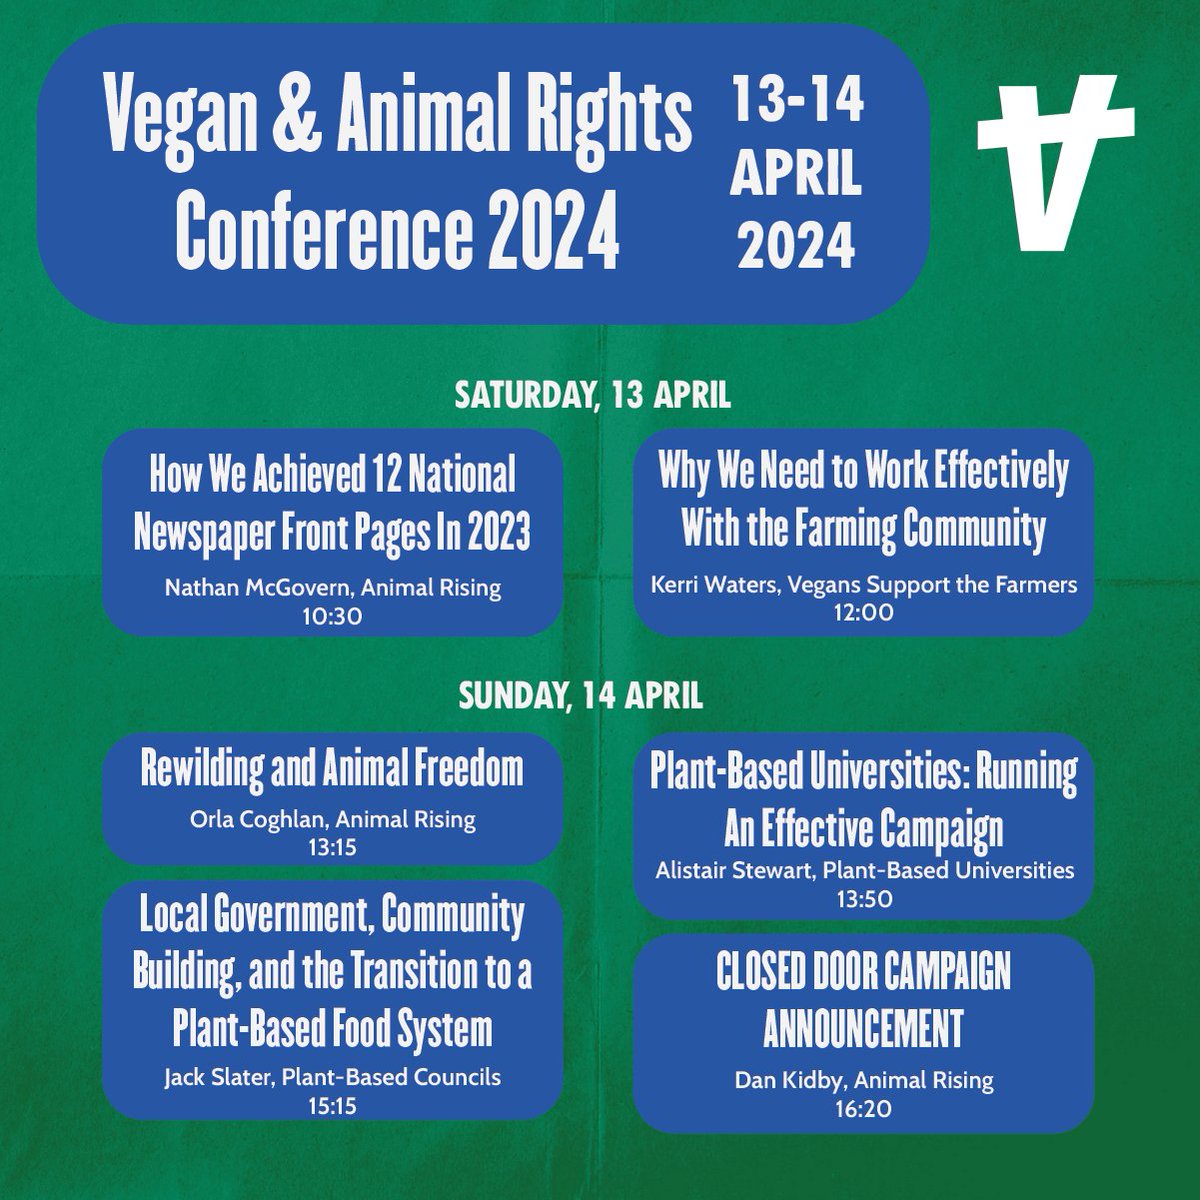 JOIN US AT THE VEGAN AND ANIMAL RIGHTS CONFERENCE We are excited to be part of the inaugural Vegan and Animal Rights Conference on 13-14 April in Manchester! Thrilled to be included in the speaker schedule alongside spokespeople from our campaigns @plantbasedunis @PBCouncils…